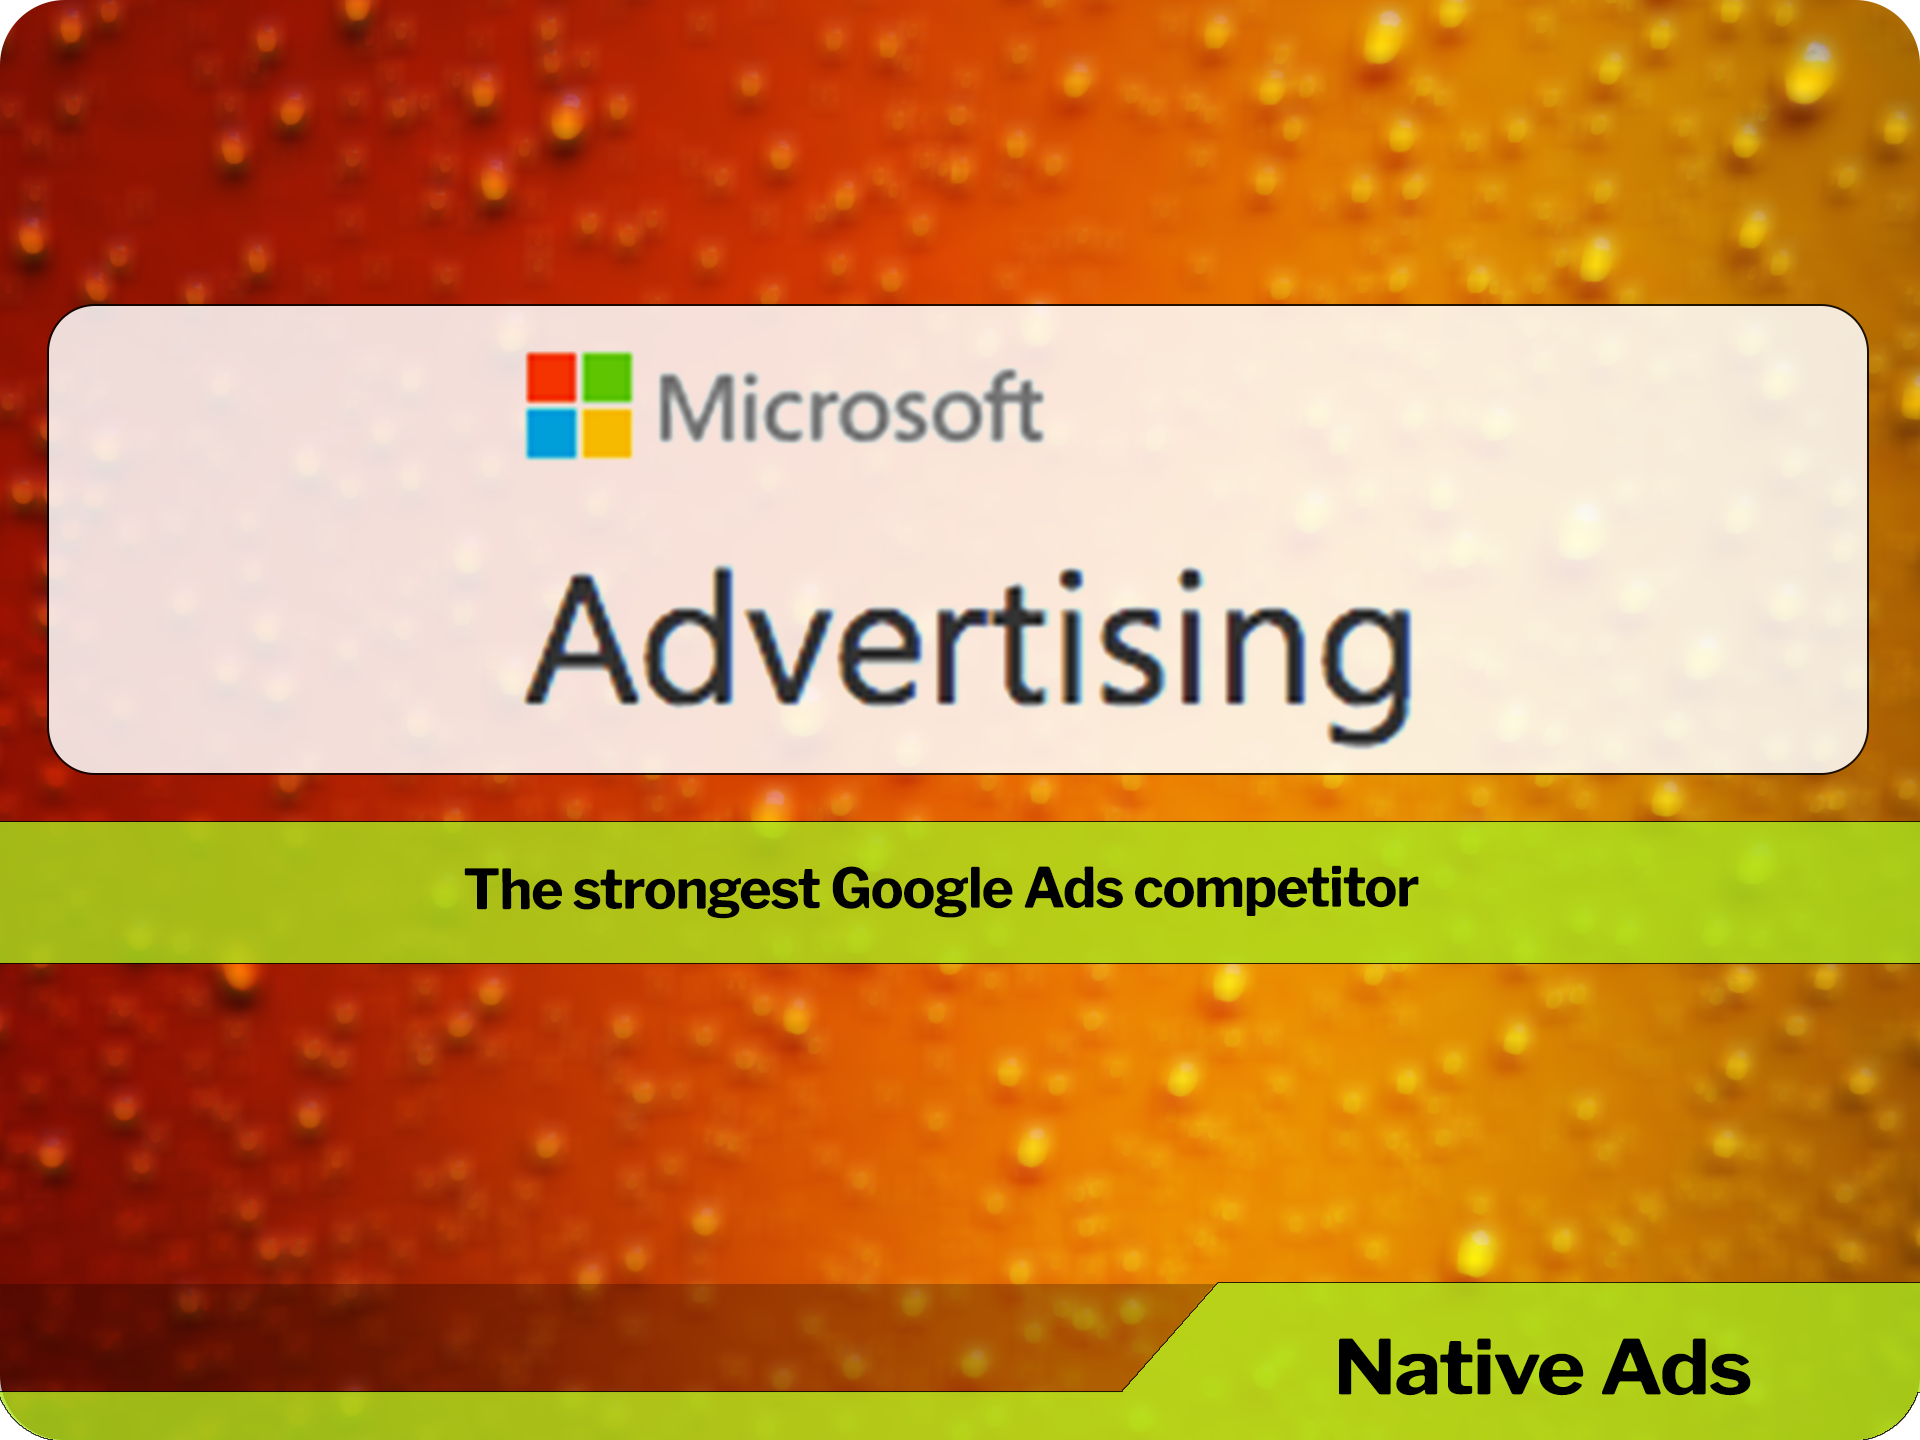 Microsoft Advertising offers opportunities to businesses of all sizes